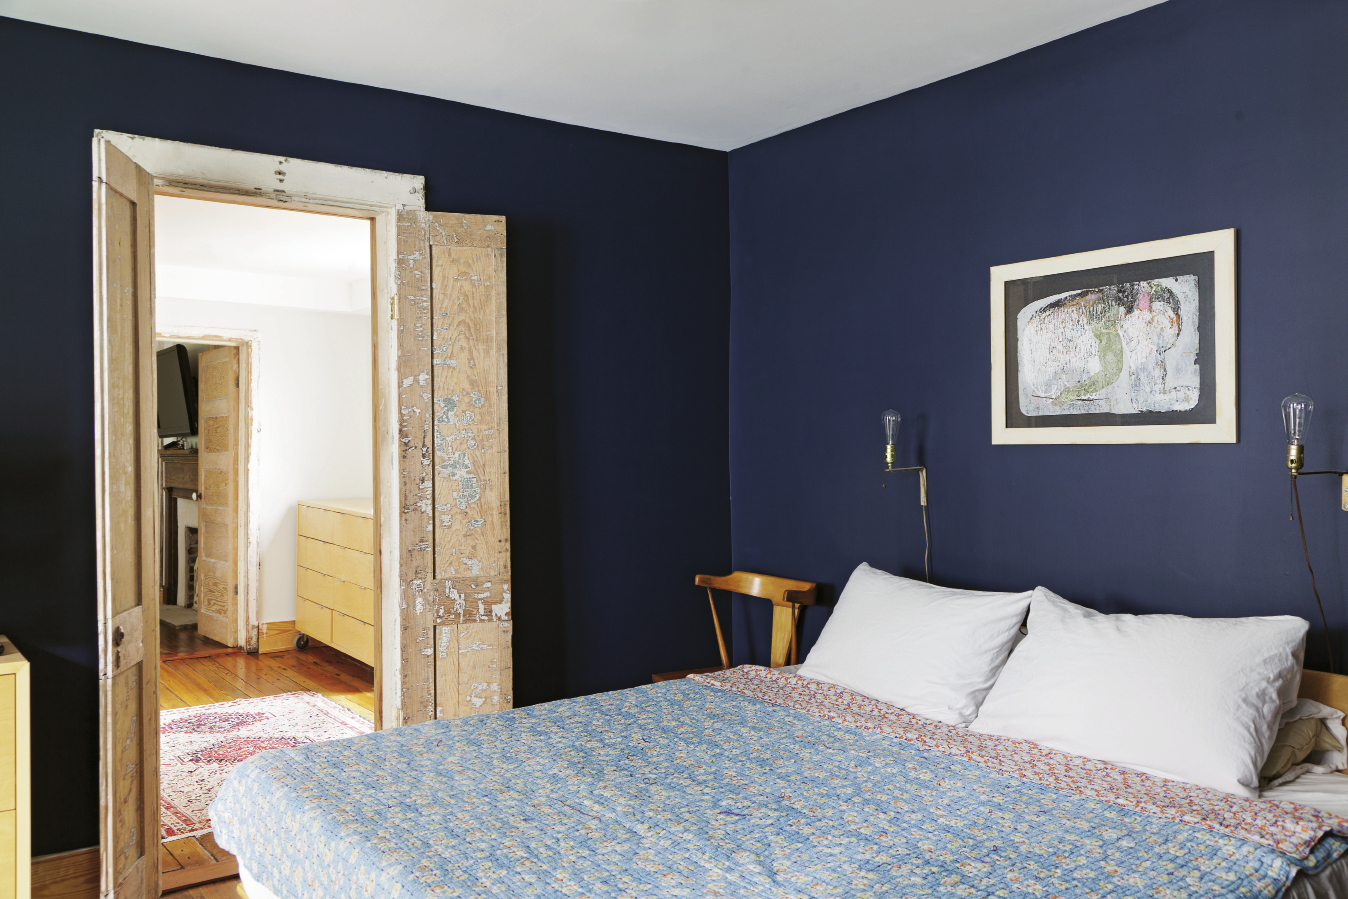 The couple’s bedroom was painted navy to facilitate a good night’s sleep.